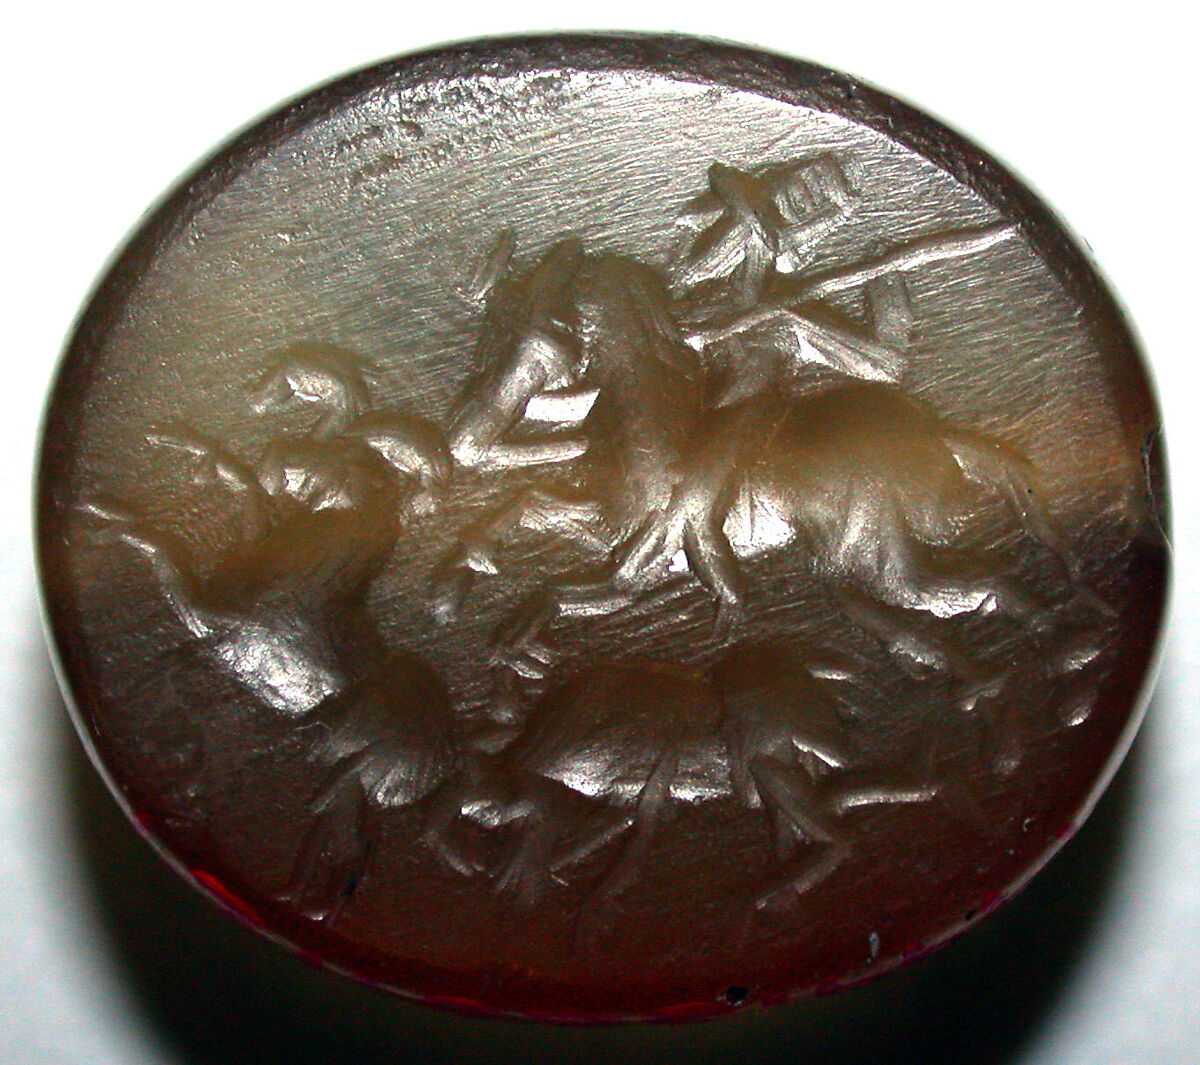 Stamp seal and modern impression: hunter on horse attacking rams, Chalcedony, Graeco-Bactrian 